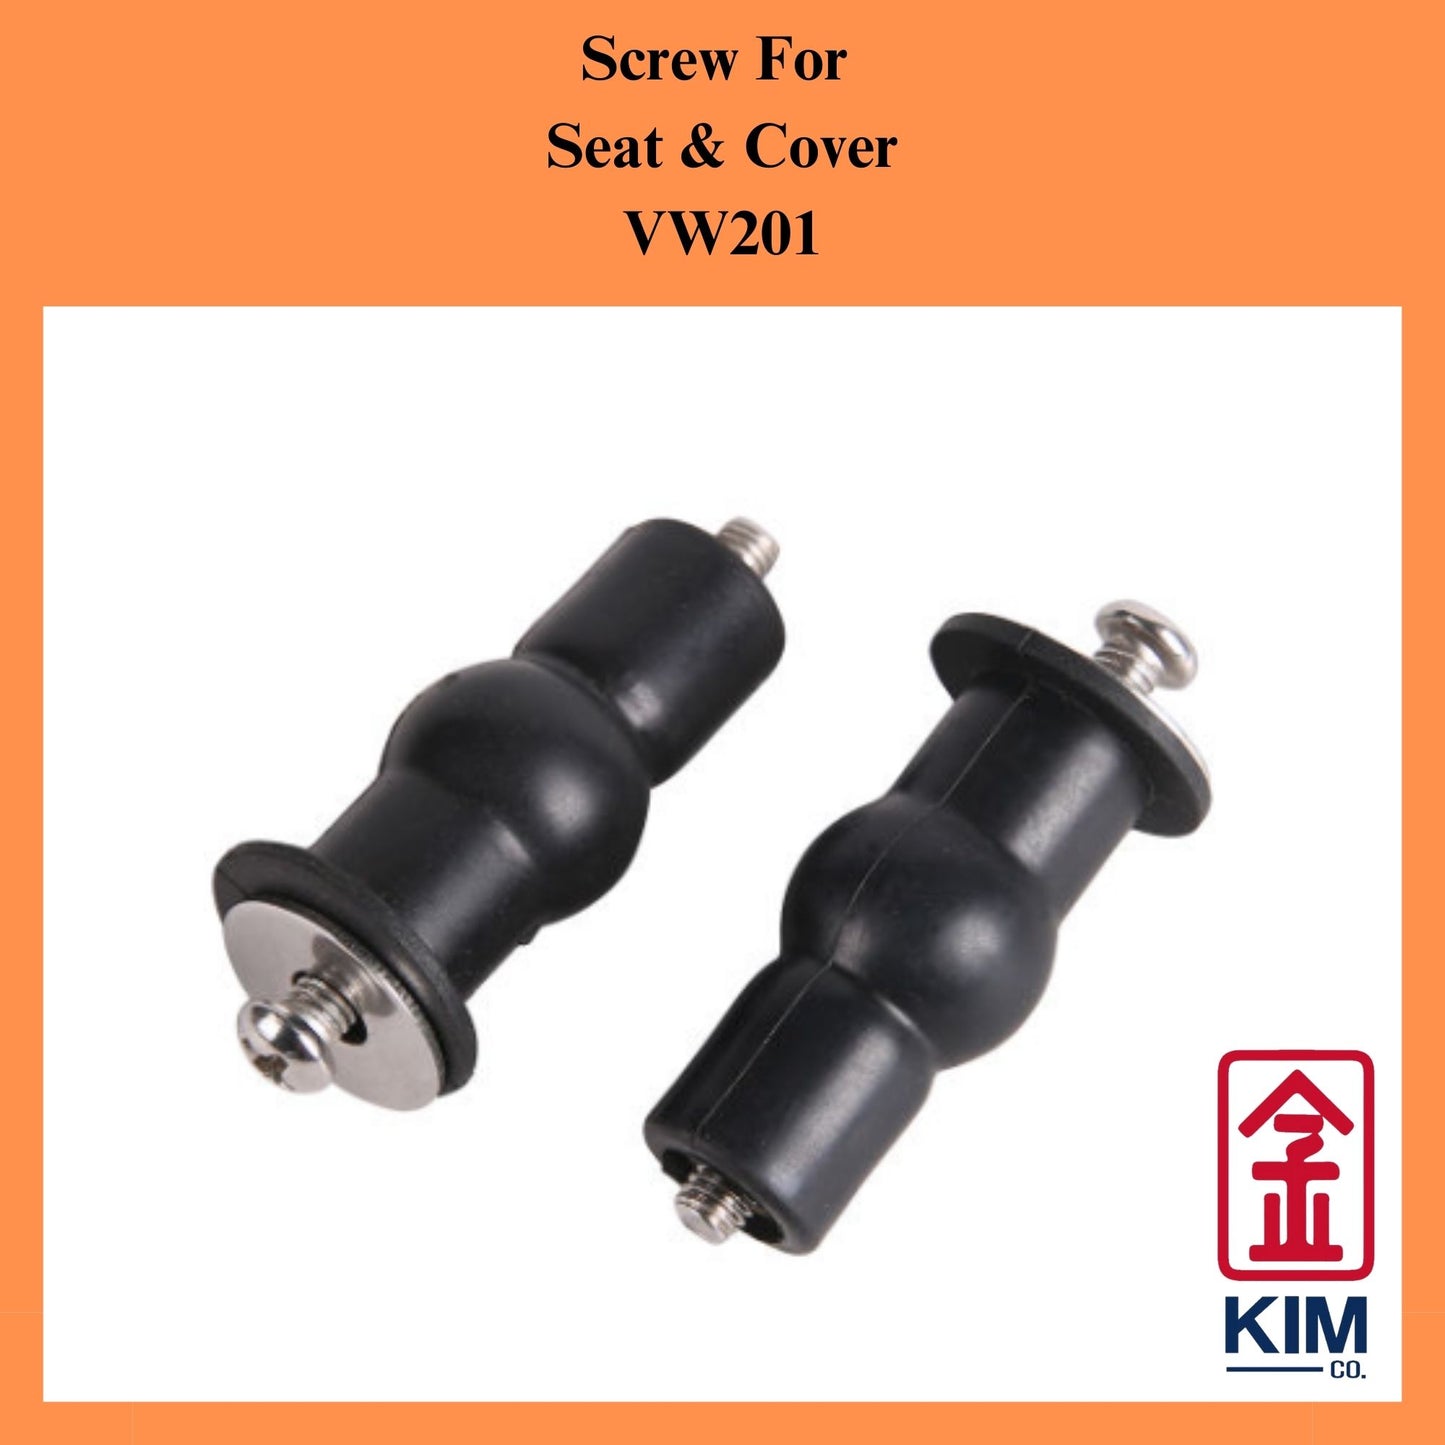 Screw For Seat & Cover (VW201)